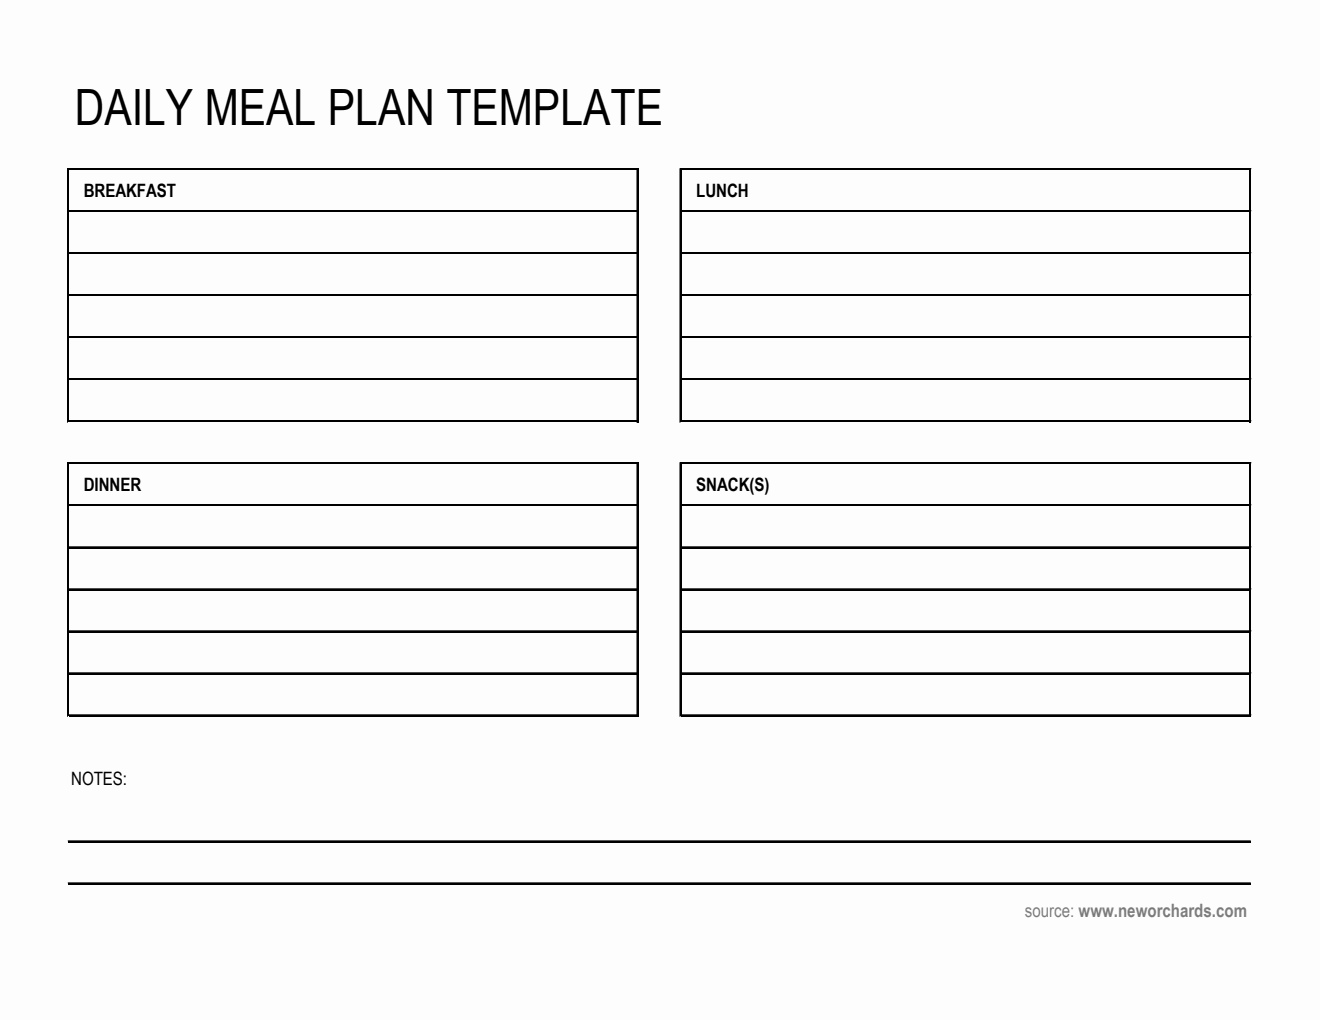 Printable Daily Meal Plan Template in Excel